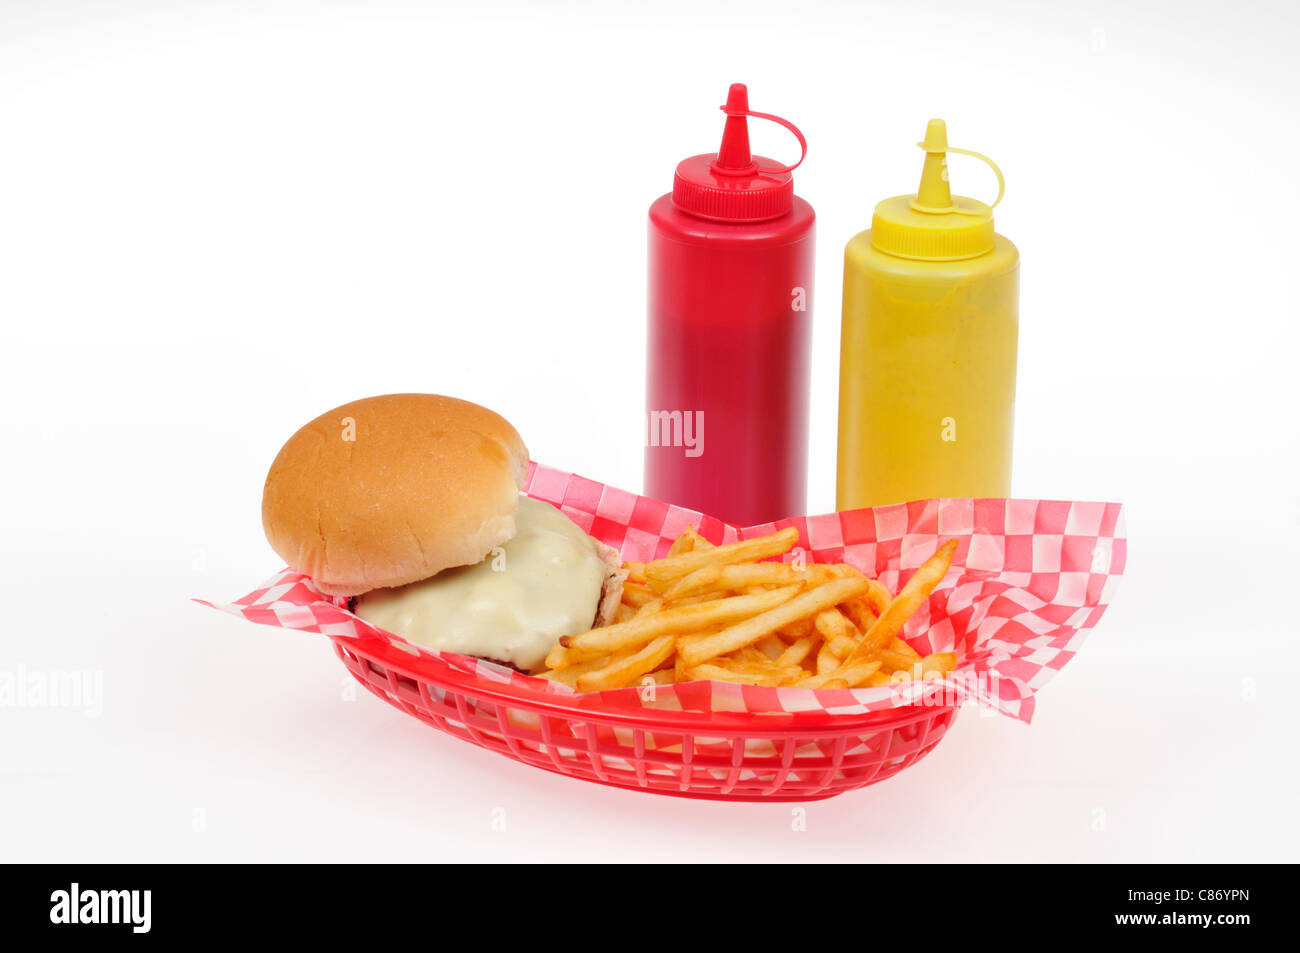 Cheeseburger with french fries in a red plastic retro basket with mustard and ketchup condiments on white background cutout. Stock Photo